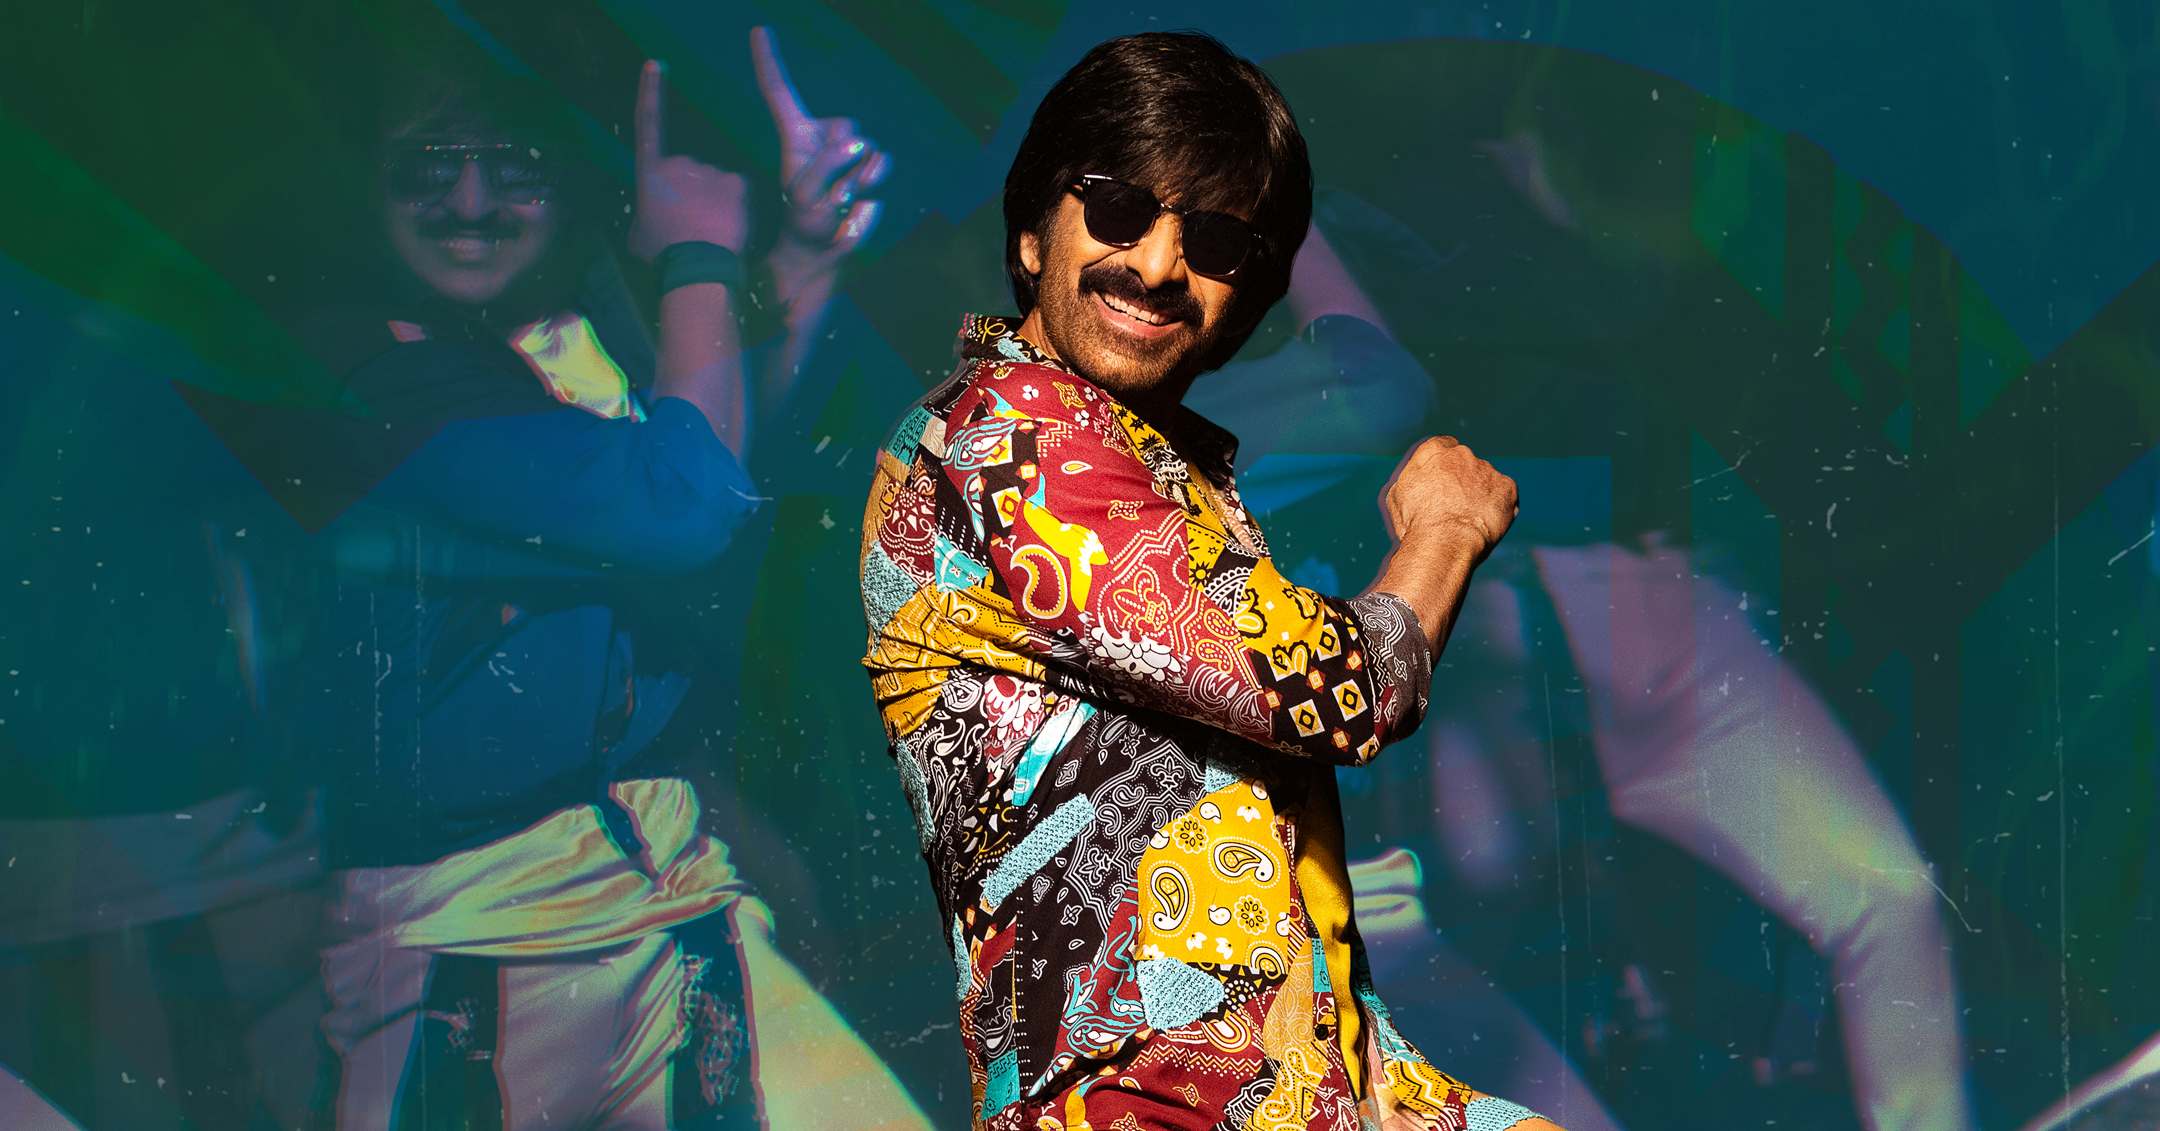 Second Single from Ravi Teja’s 'Mr Bachchan' Drops July 25th